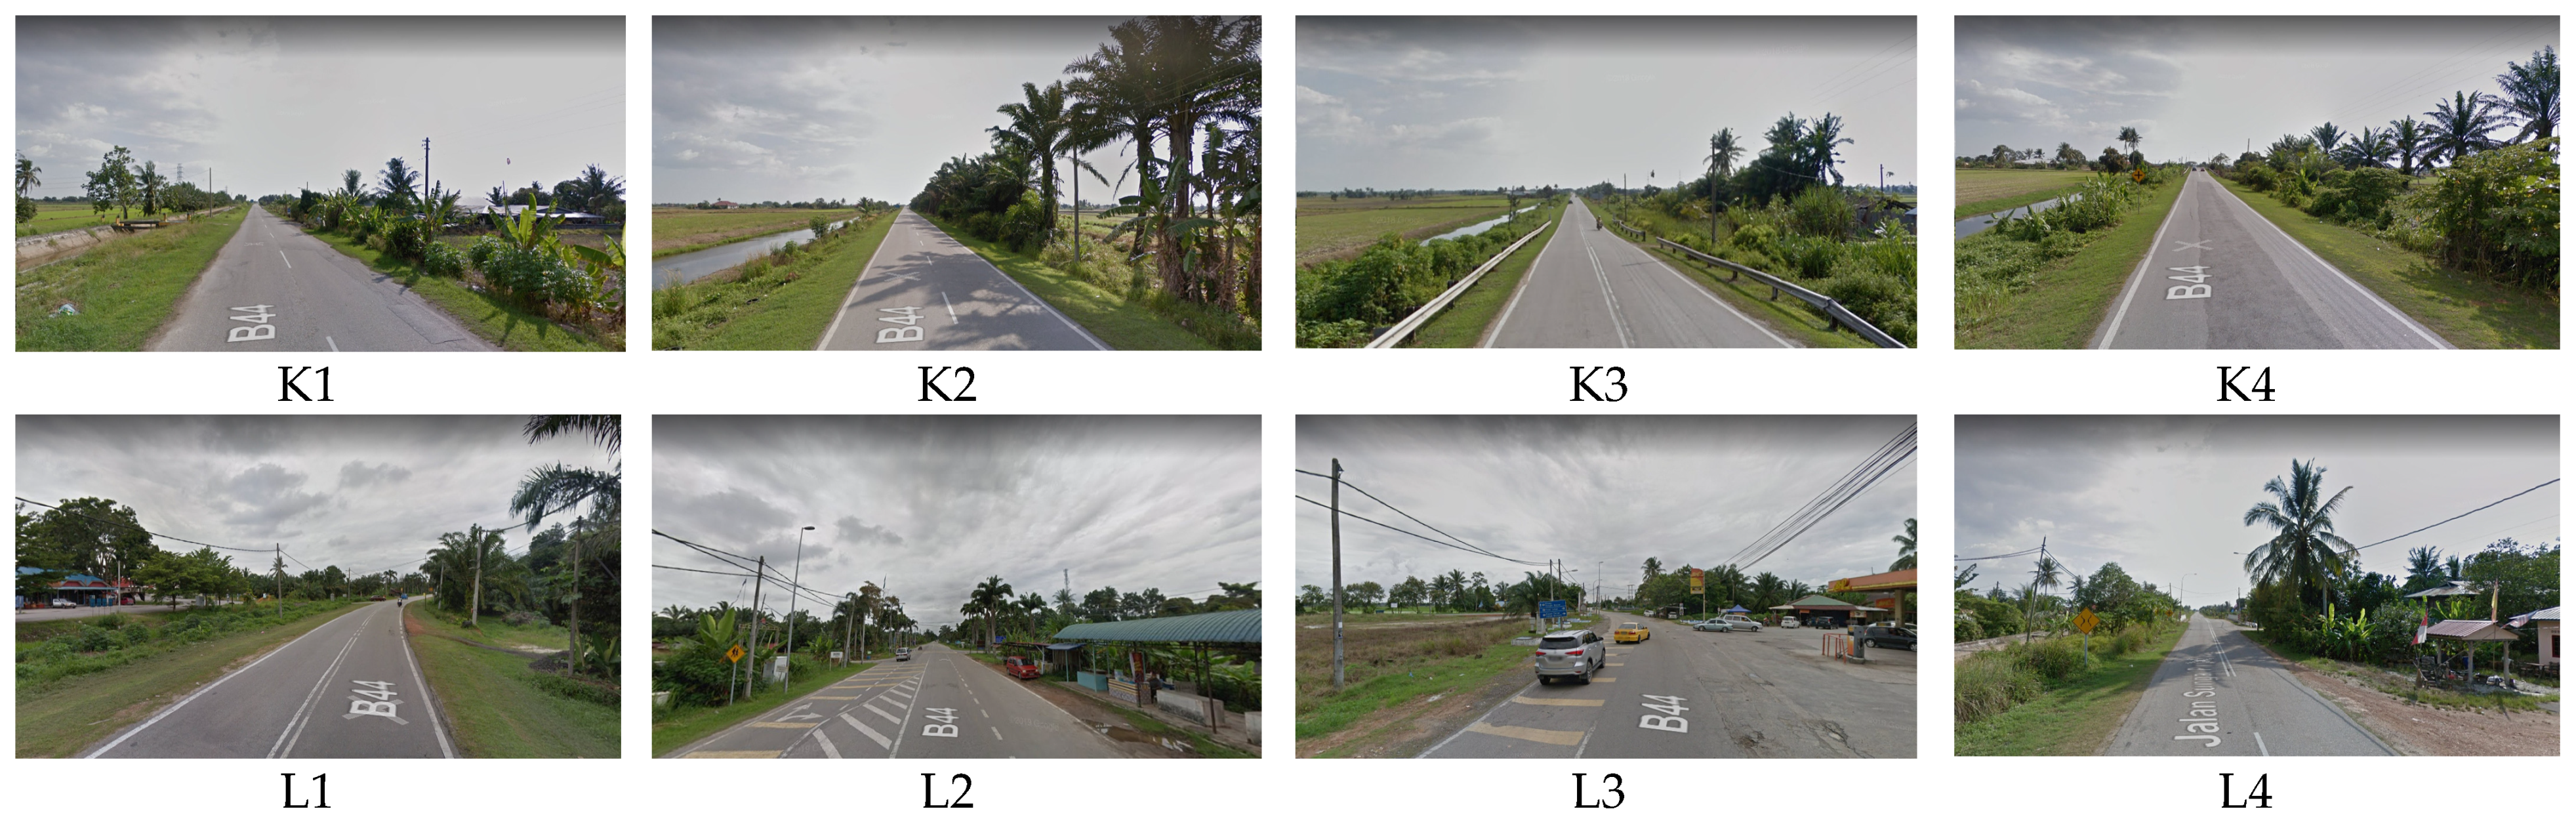 Land | Free Full-Text | Identifying Visual Quality of Rural Road